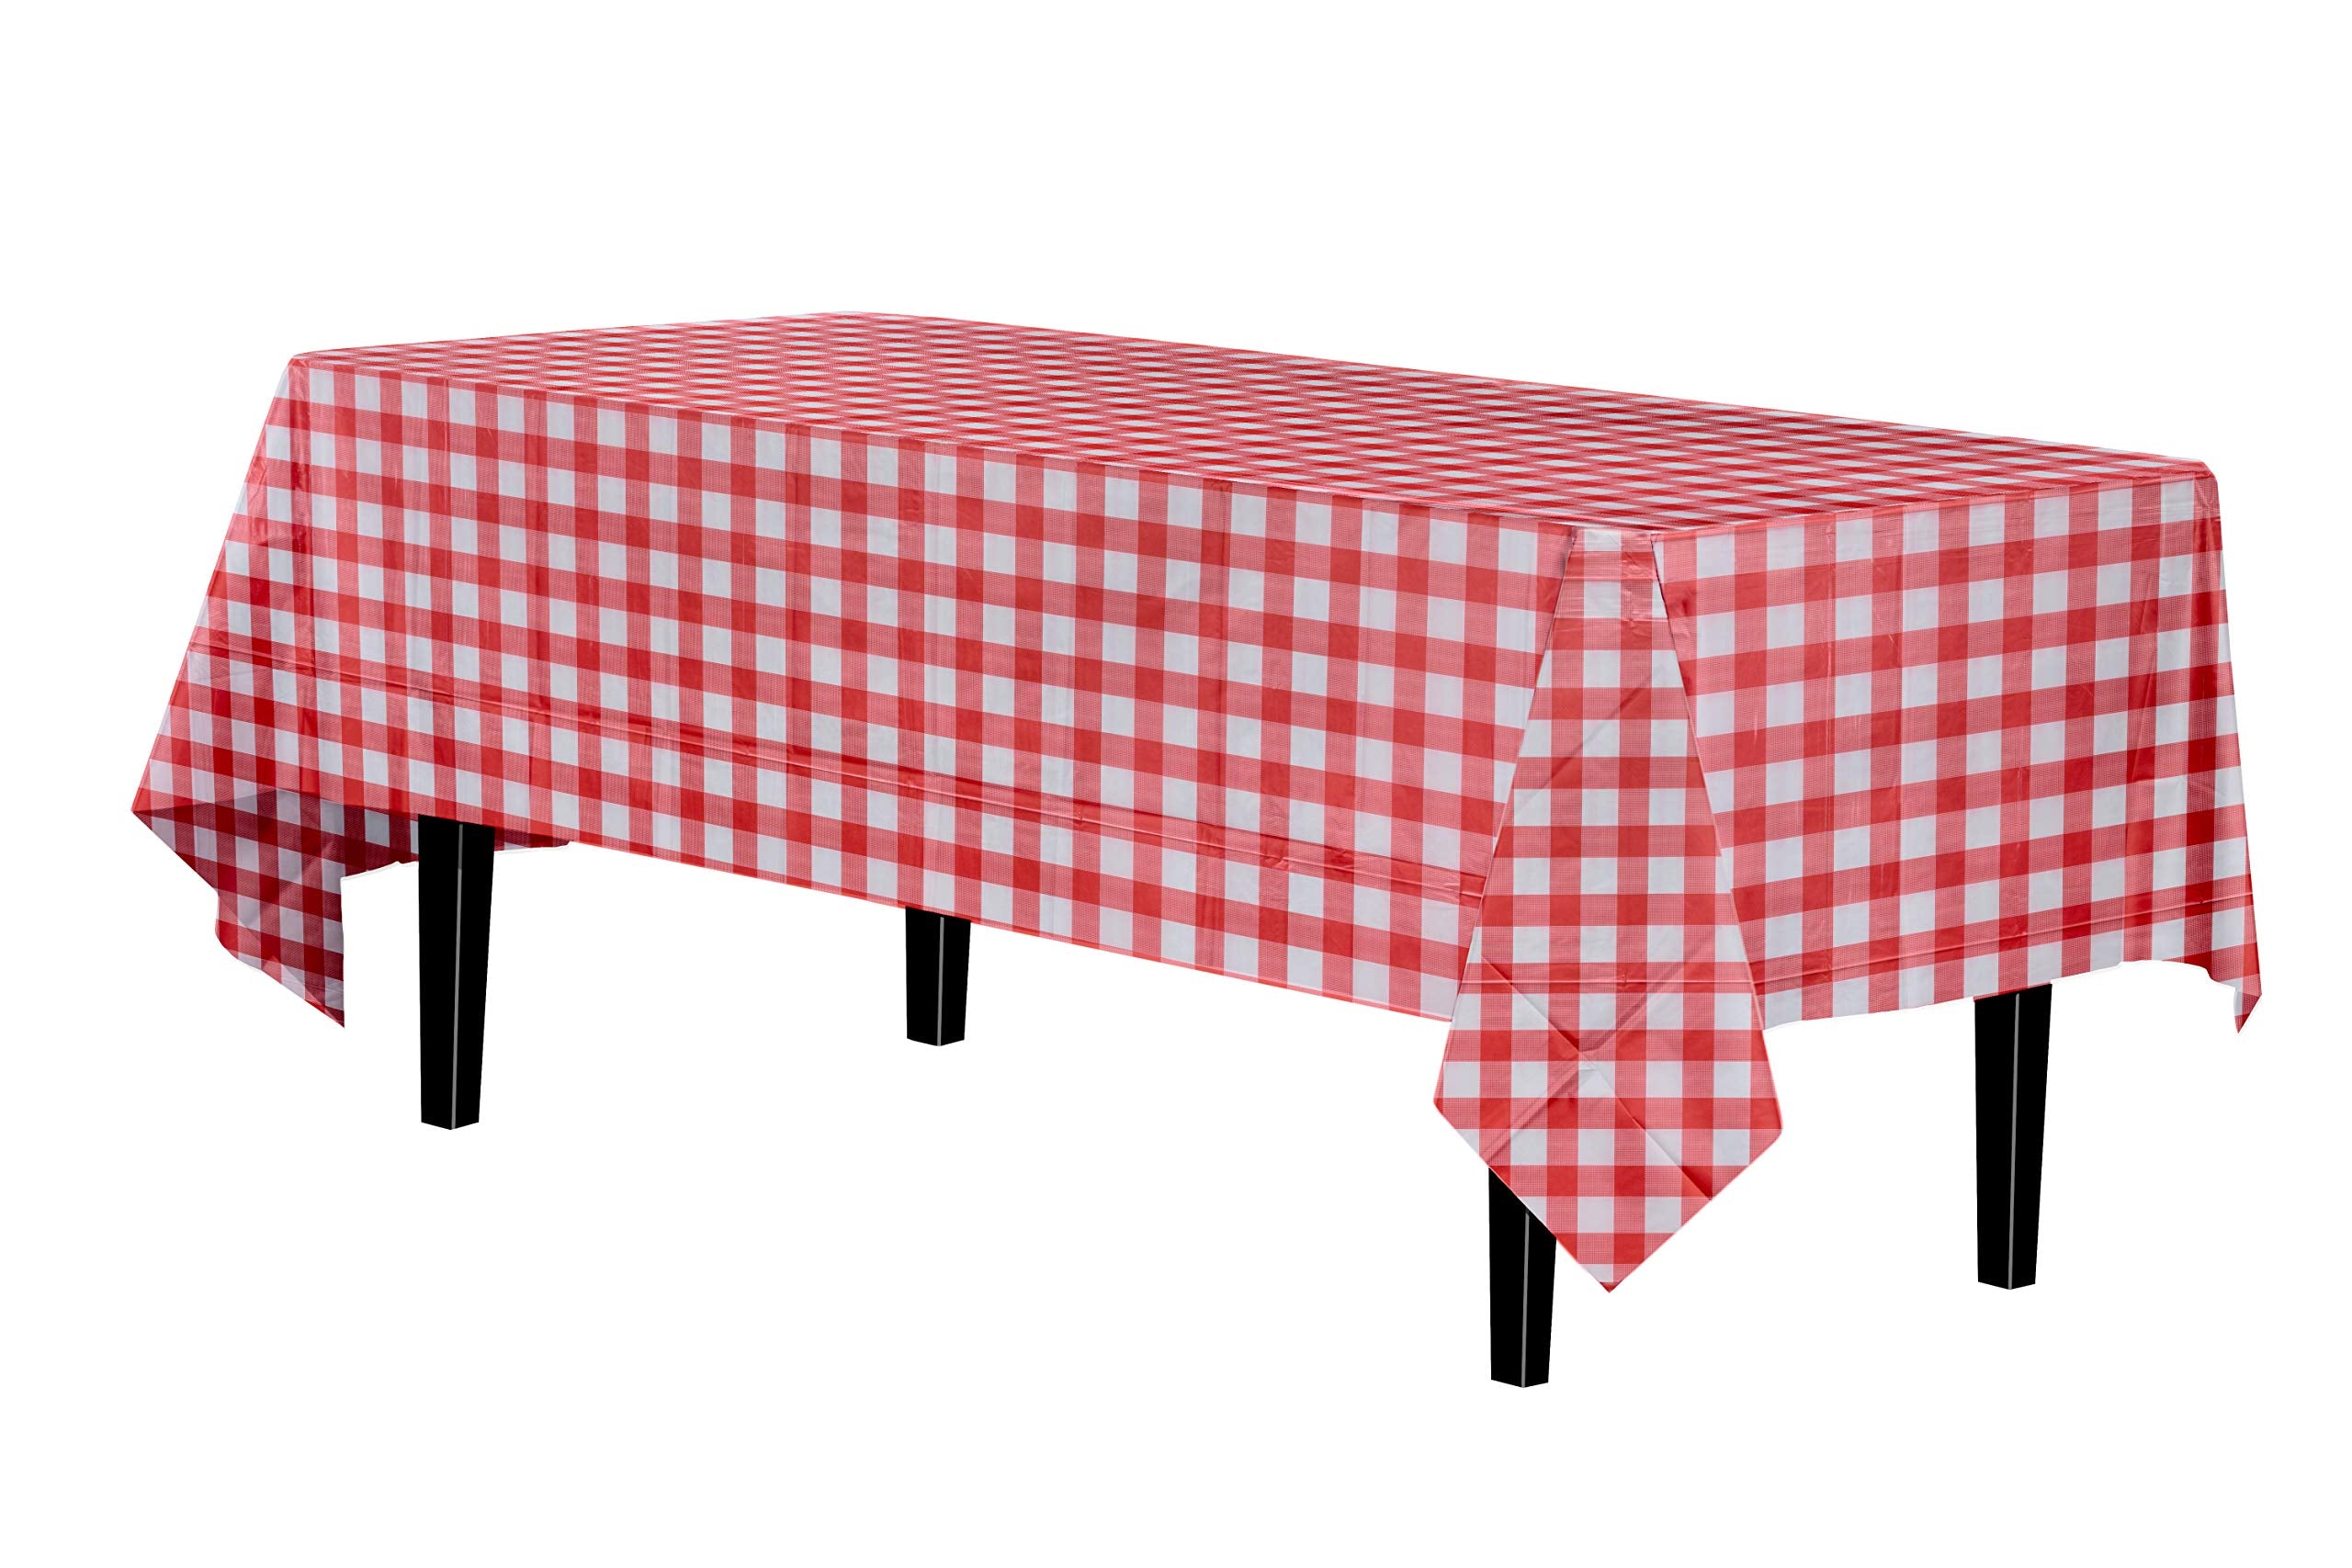 Red gingham plastic Table Cover